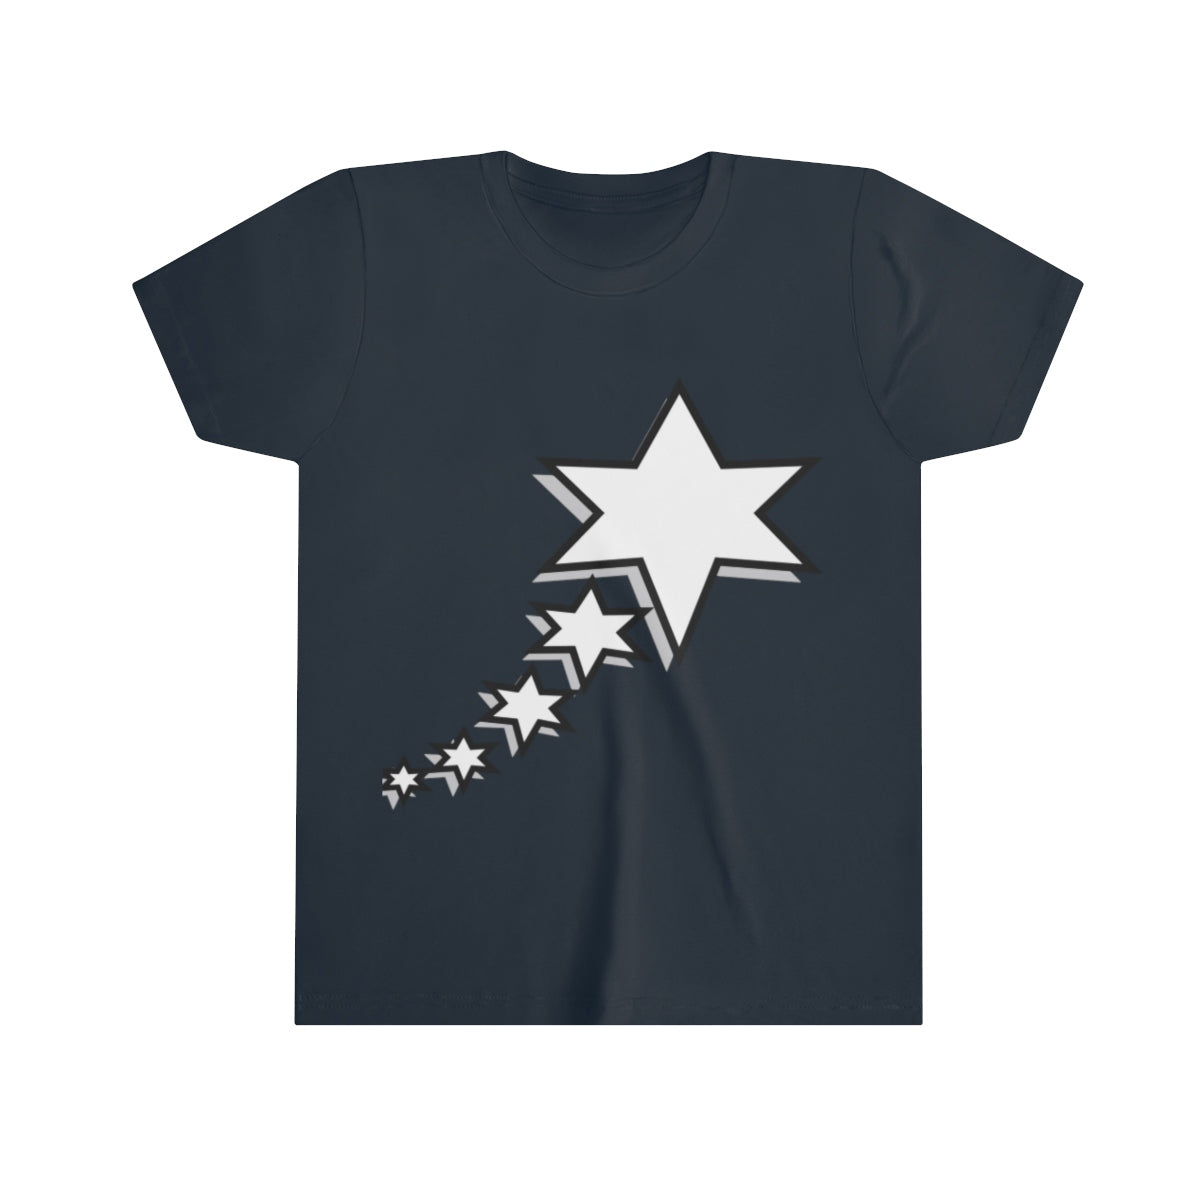 Youth Short Sleeve Tee - 6 Points 5 Stars (White)